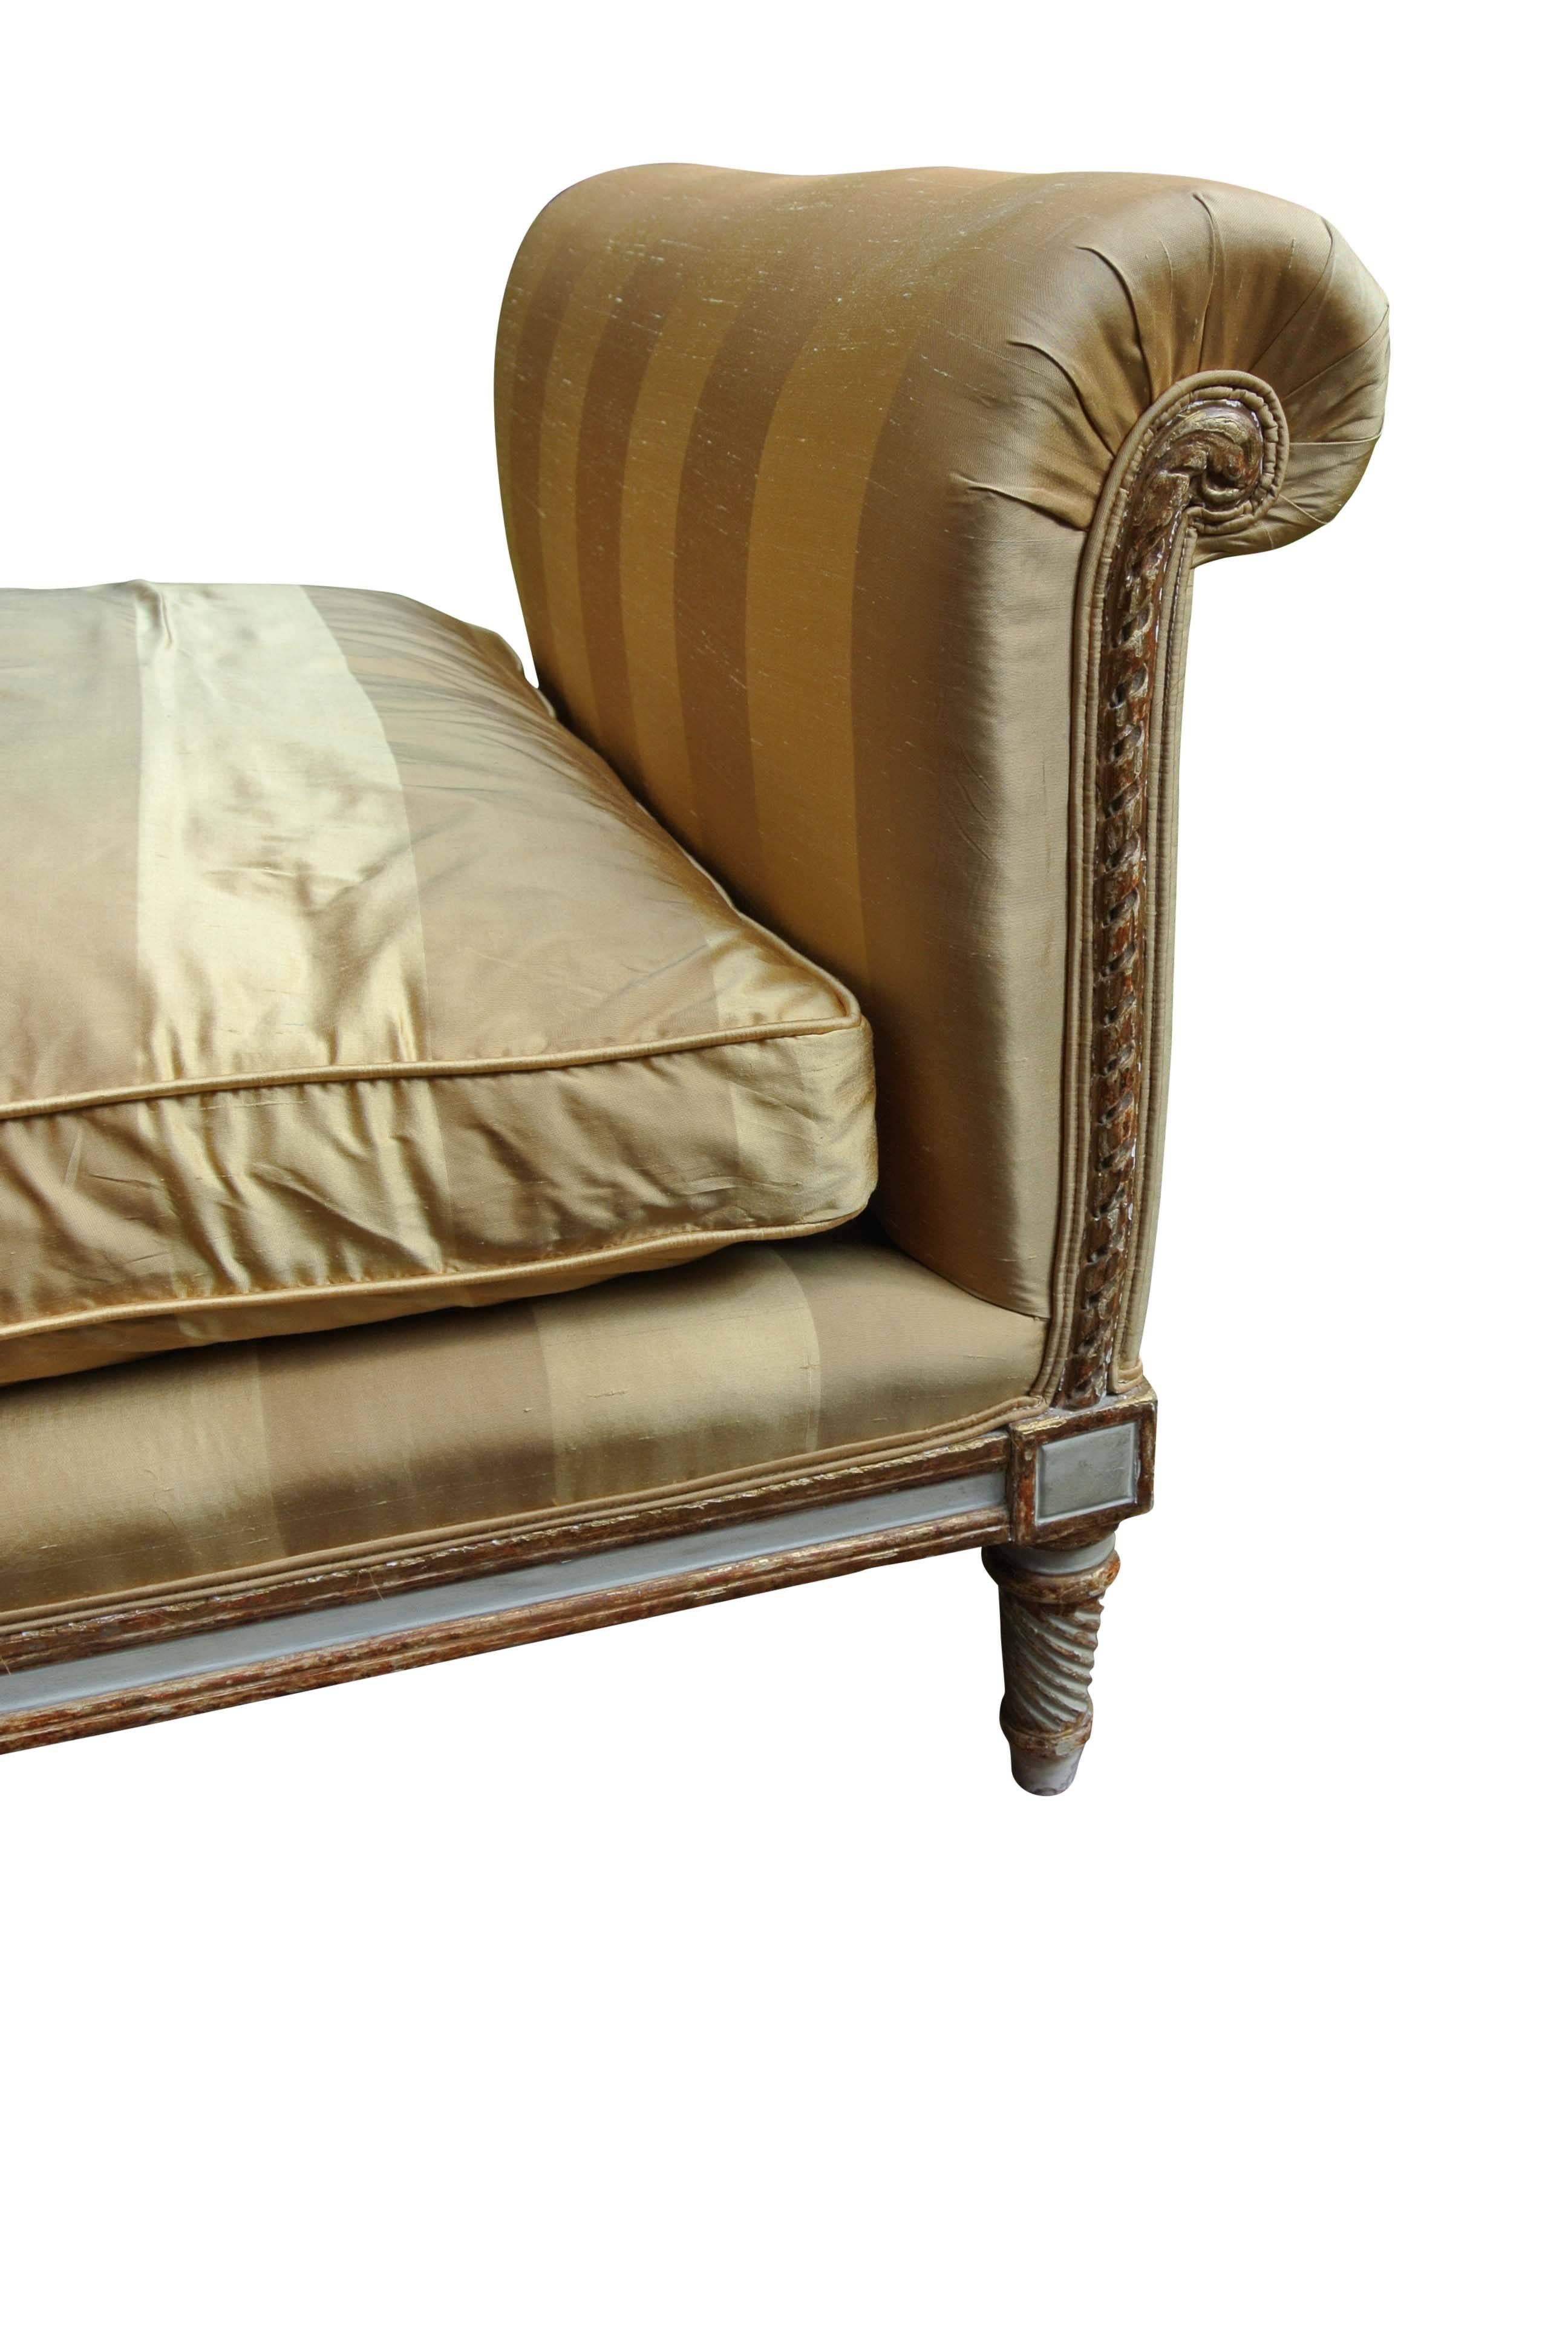 19th Century French Silk Lit Du Jour Day Bed 1